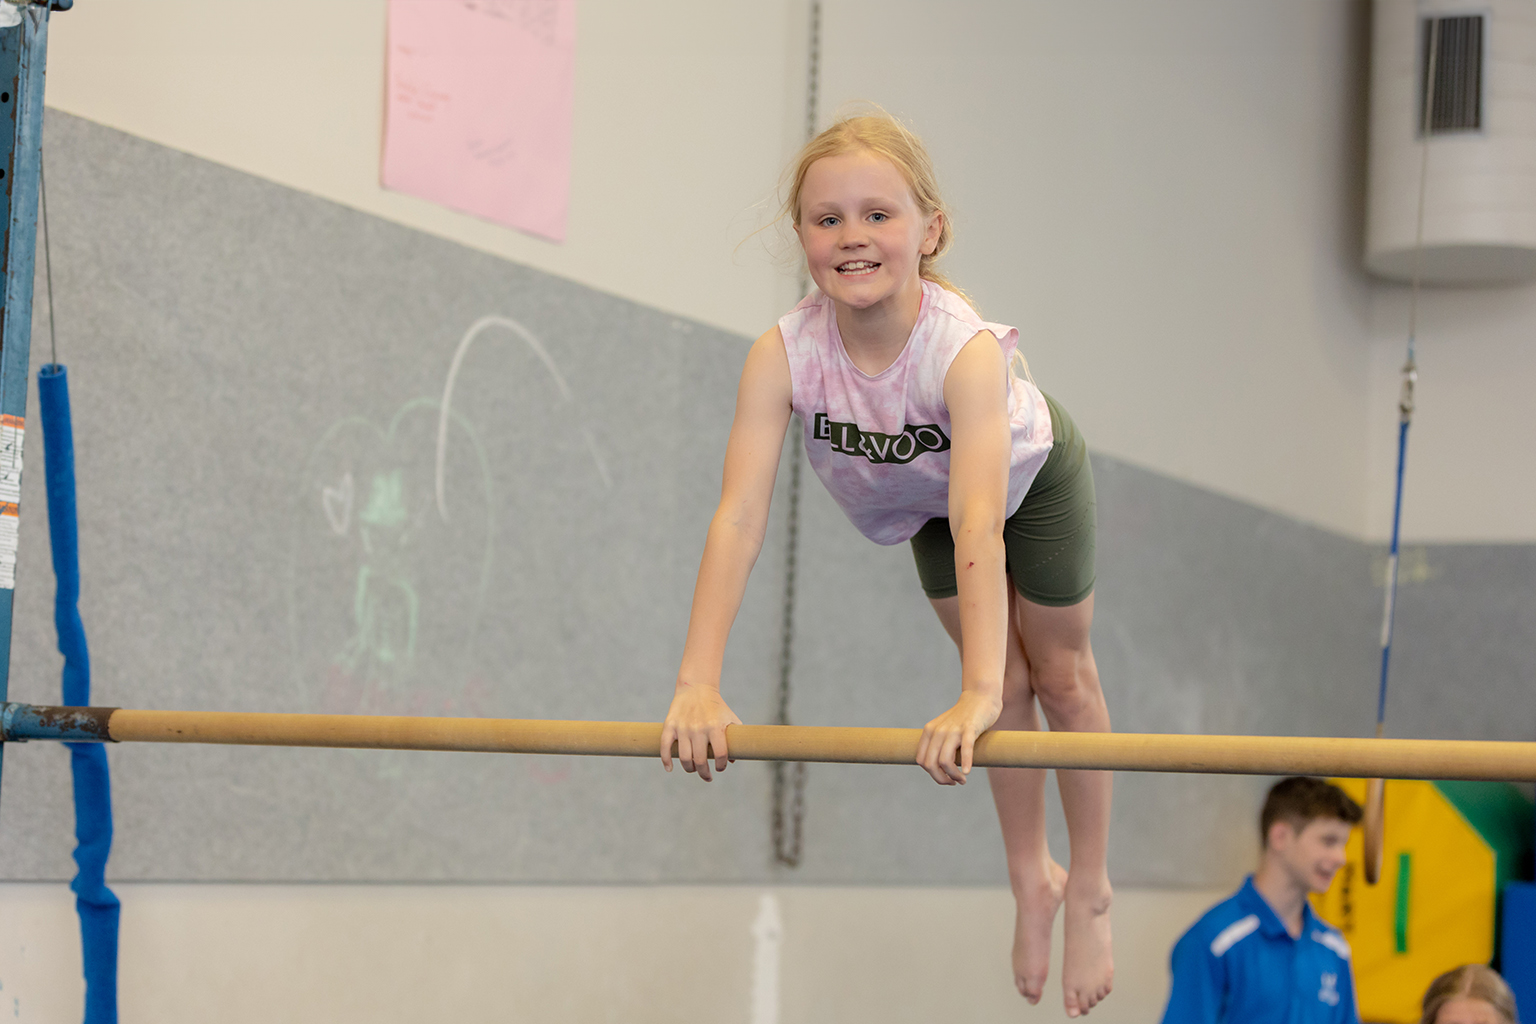 A girl jumps in the air while holding a gymnastics bar